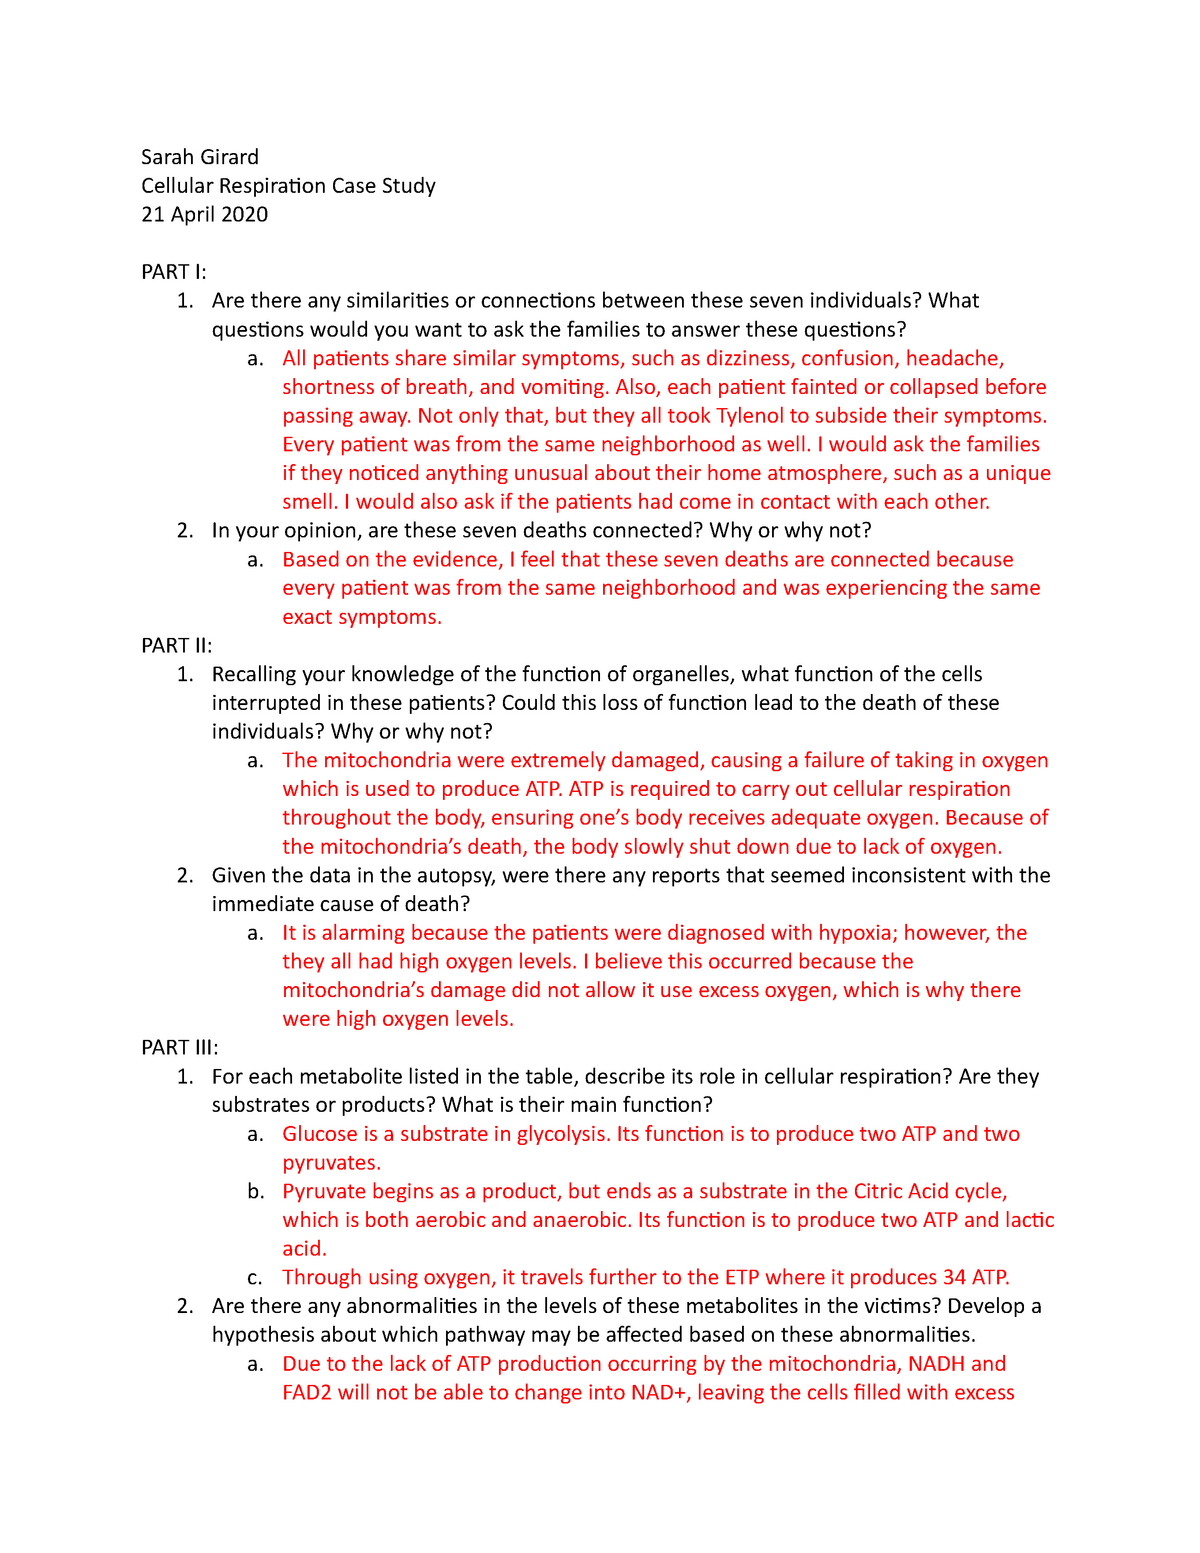 hot and bothered case study answer key